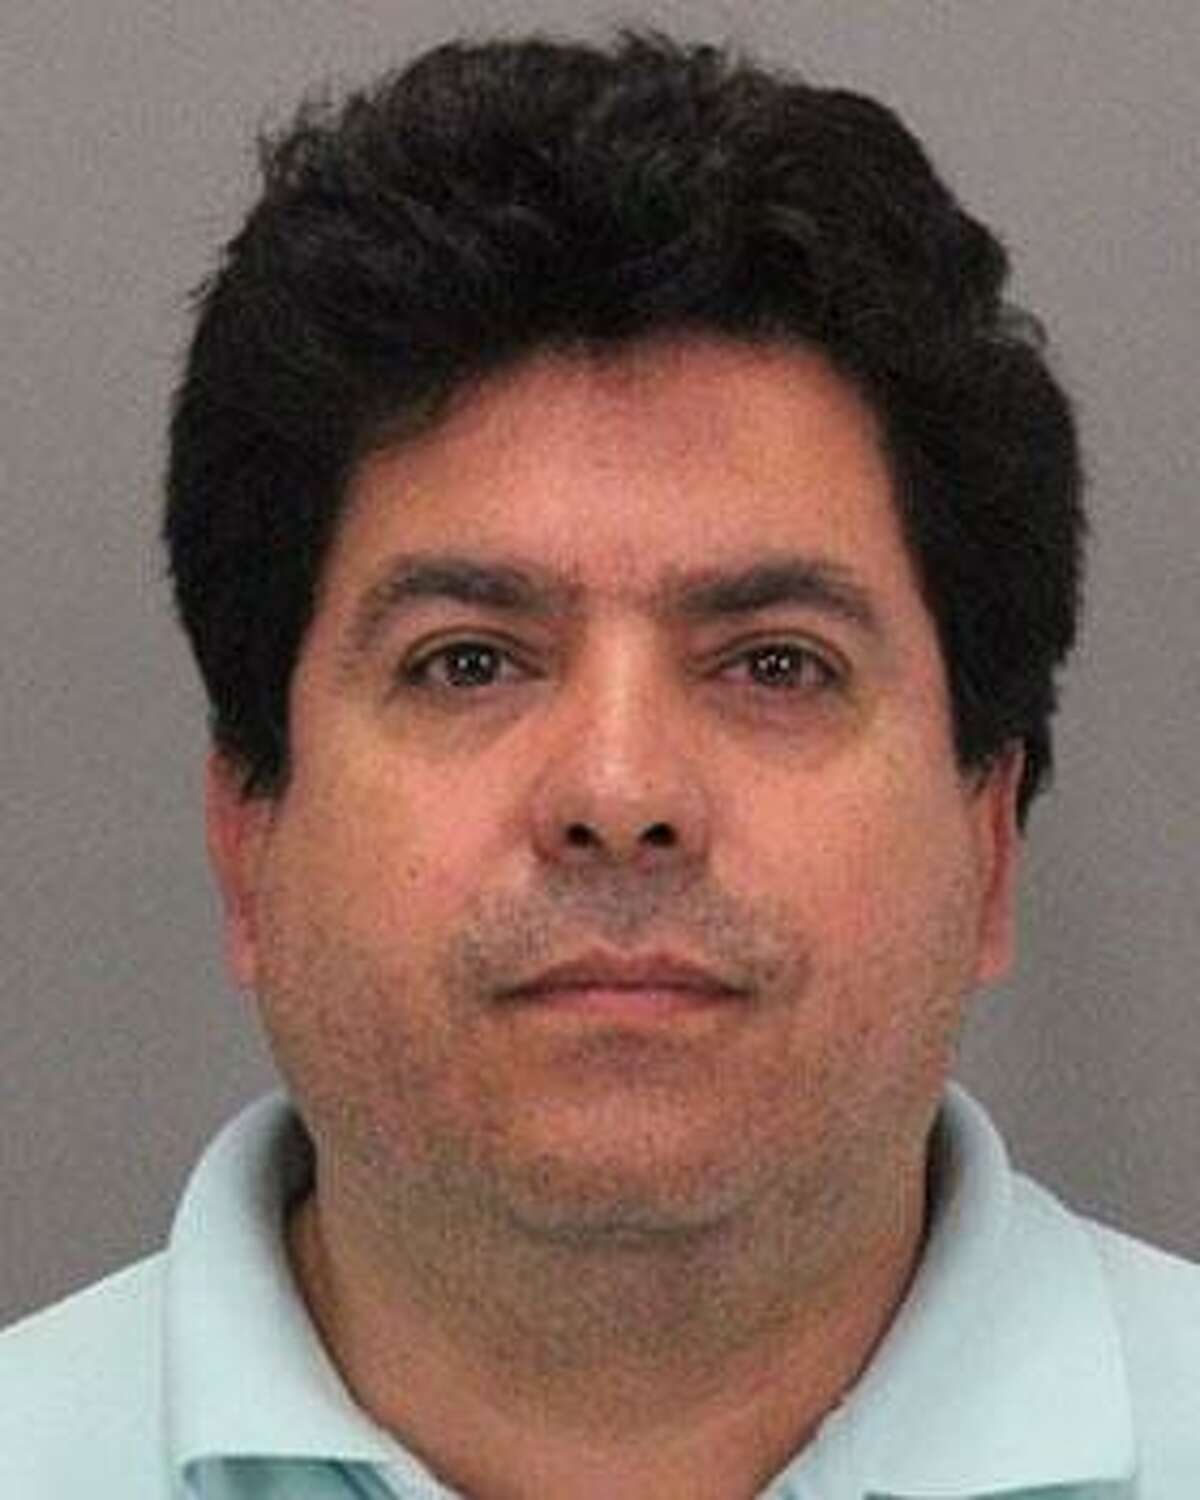 San Jose resident Ezequiel Aaron Dureo-Carvajal, 47, was arrested on suspicion of sexual battery, among other allegations, police said on Monday.